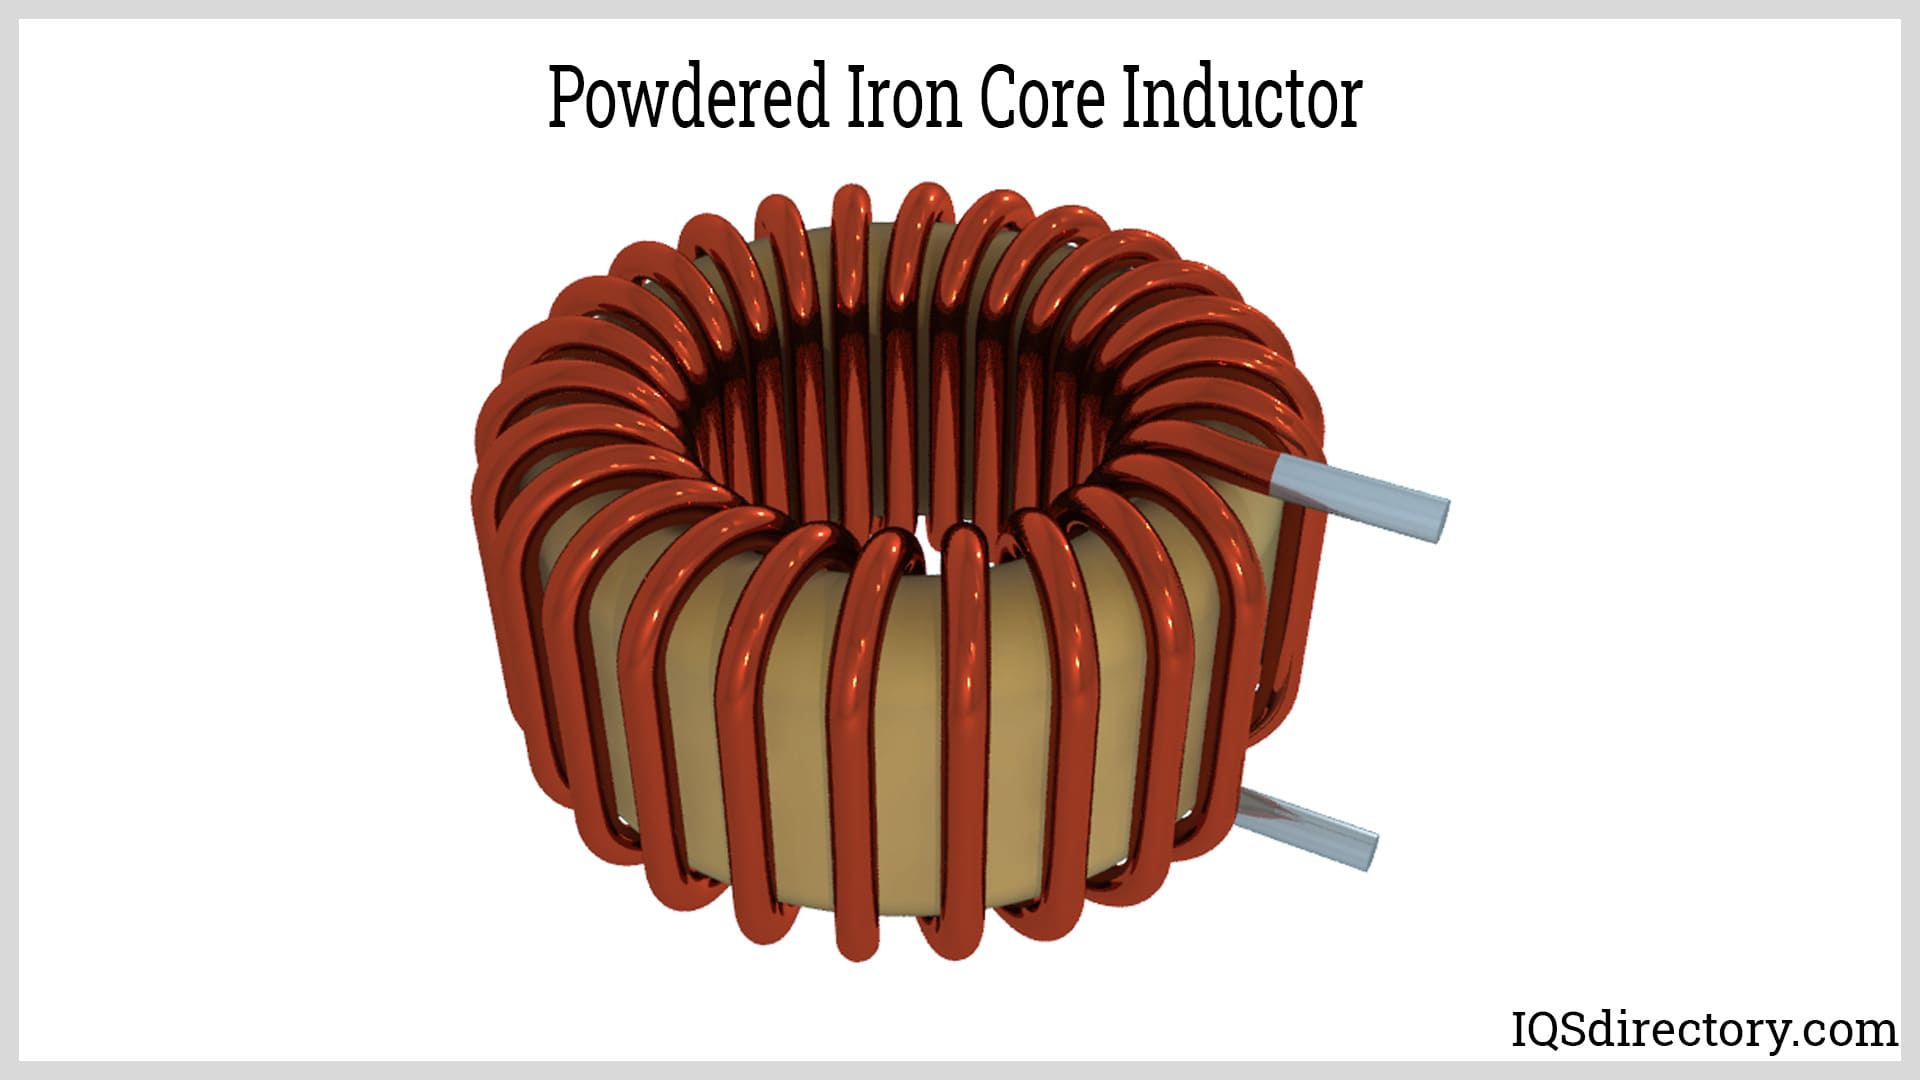 Powdered Metal Core Inductor